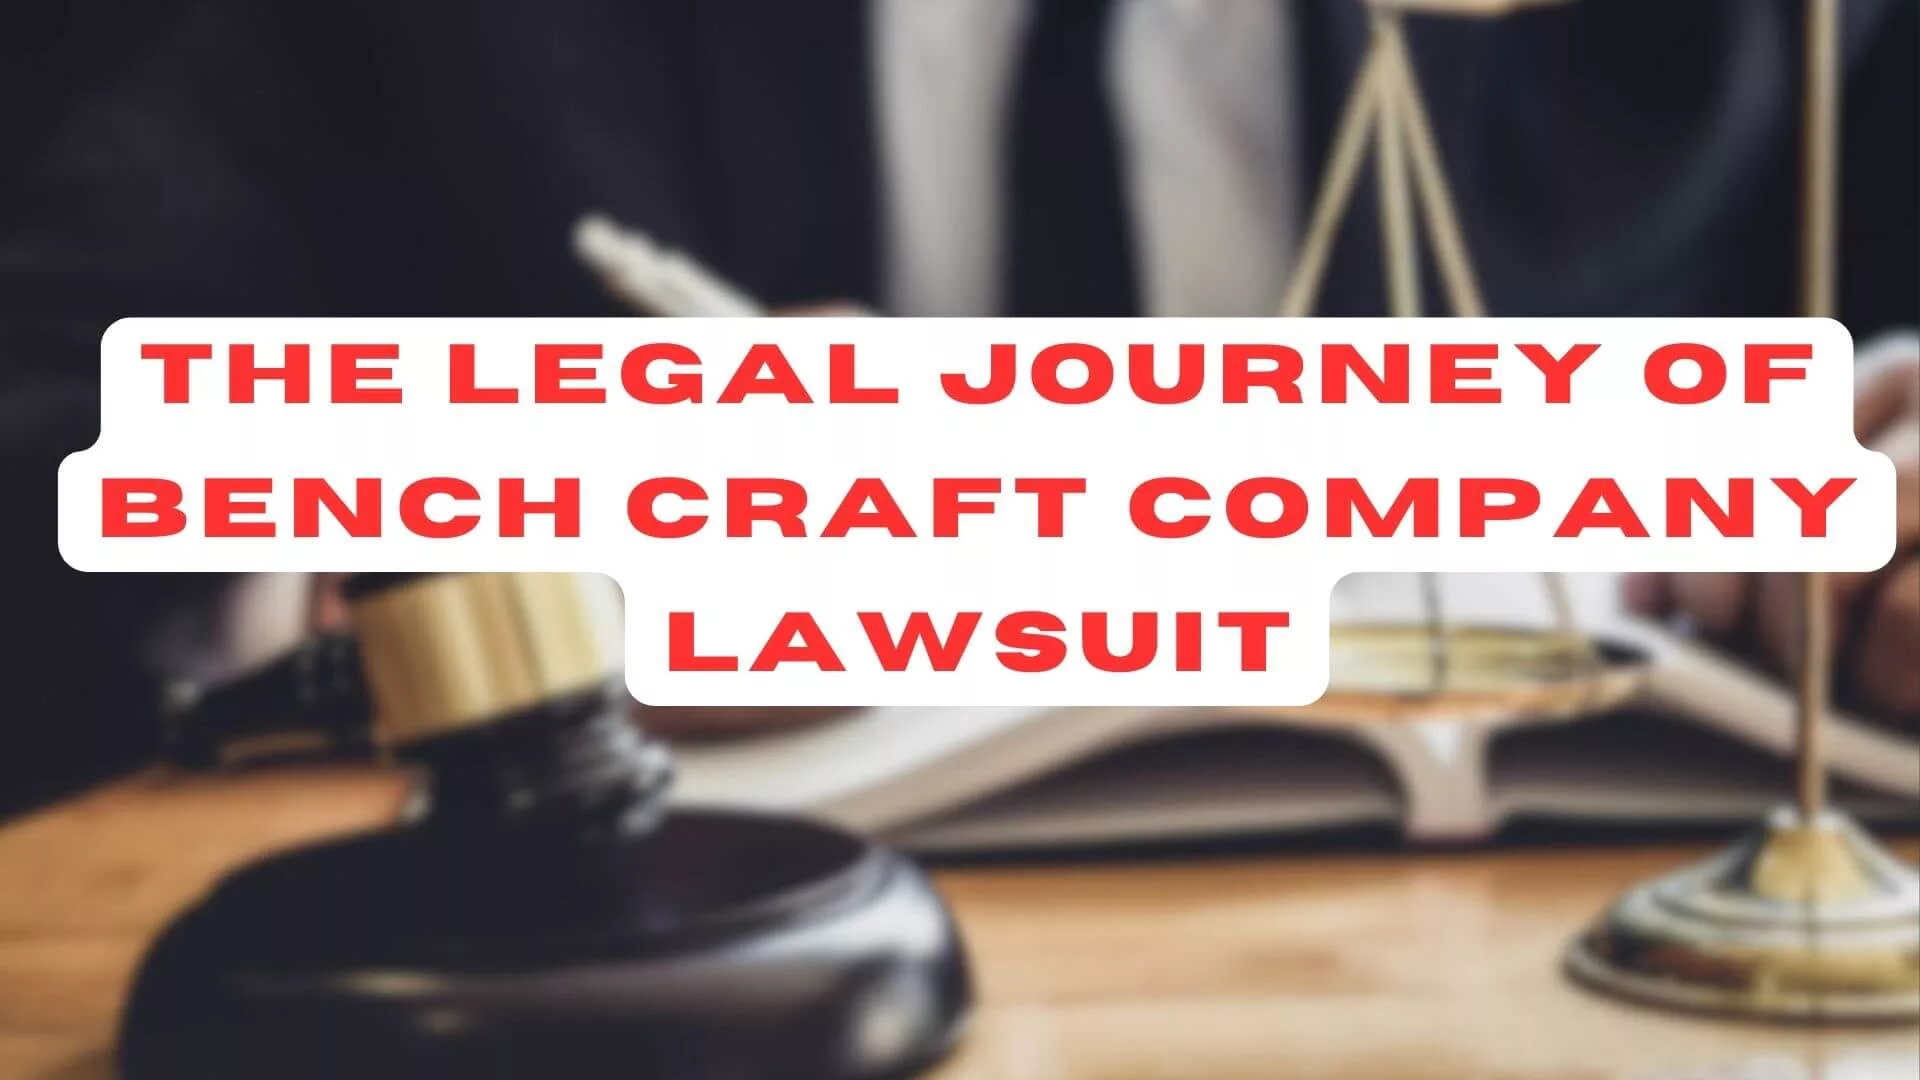 The Legal Journey of Bench Craft Company Lawsuit